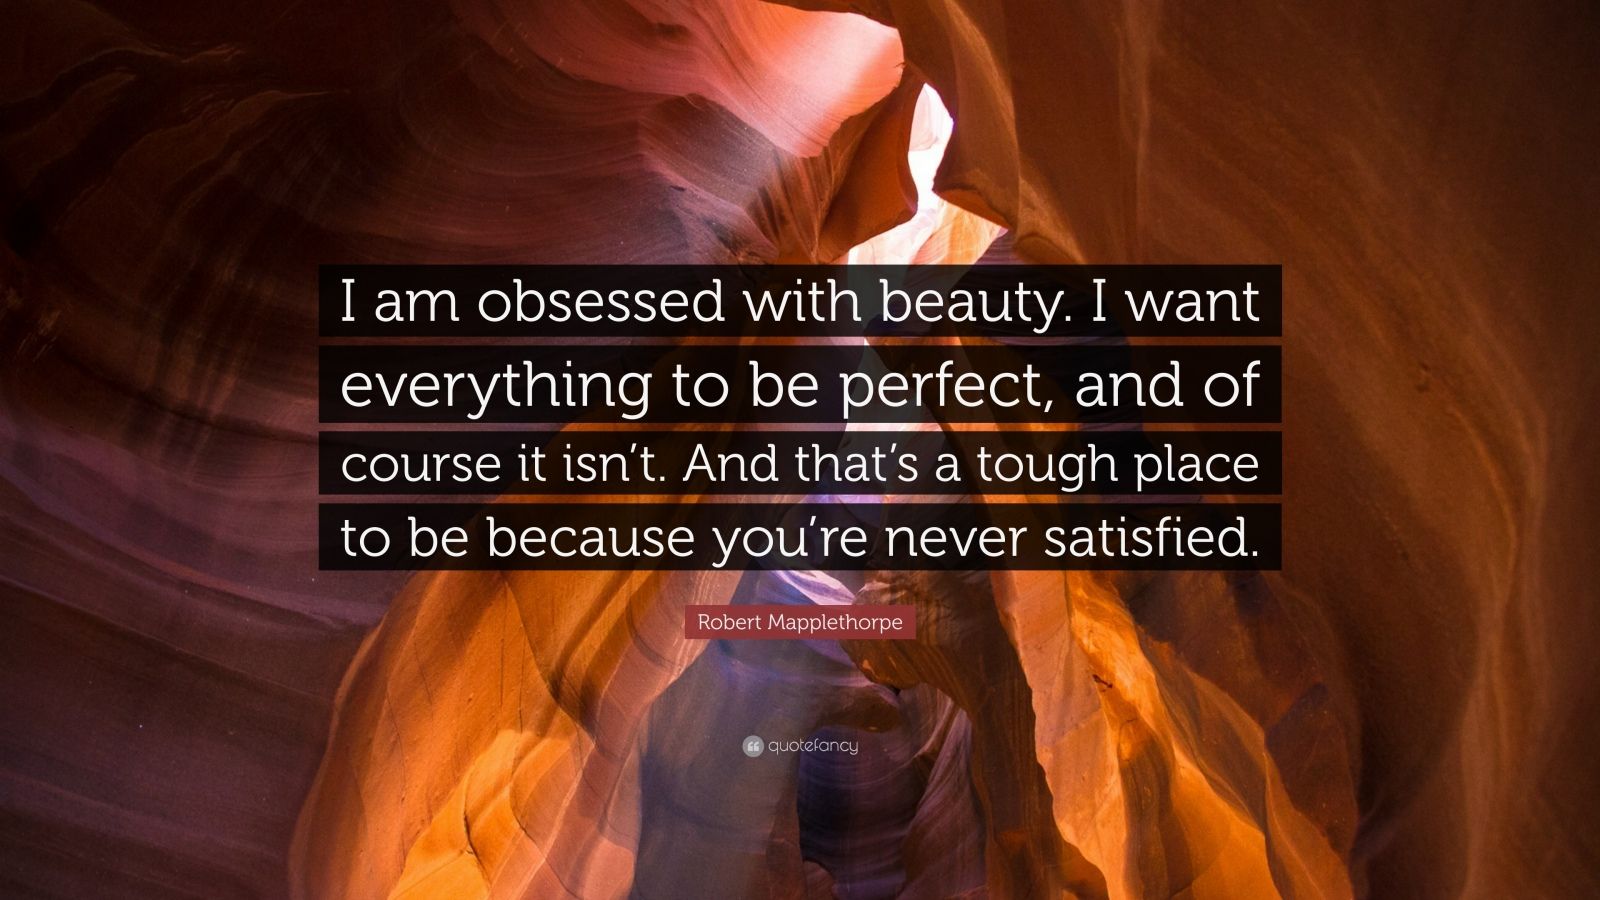 https://quotefancy.com/media/wallpaper/1600x900/1011947-Robert-Mapplethorpe-Quote-I-am-obsessed-with-beauty-I-want.jpg